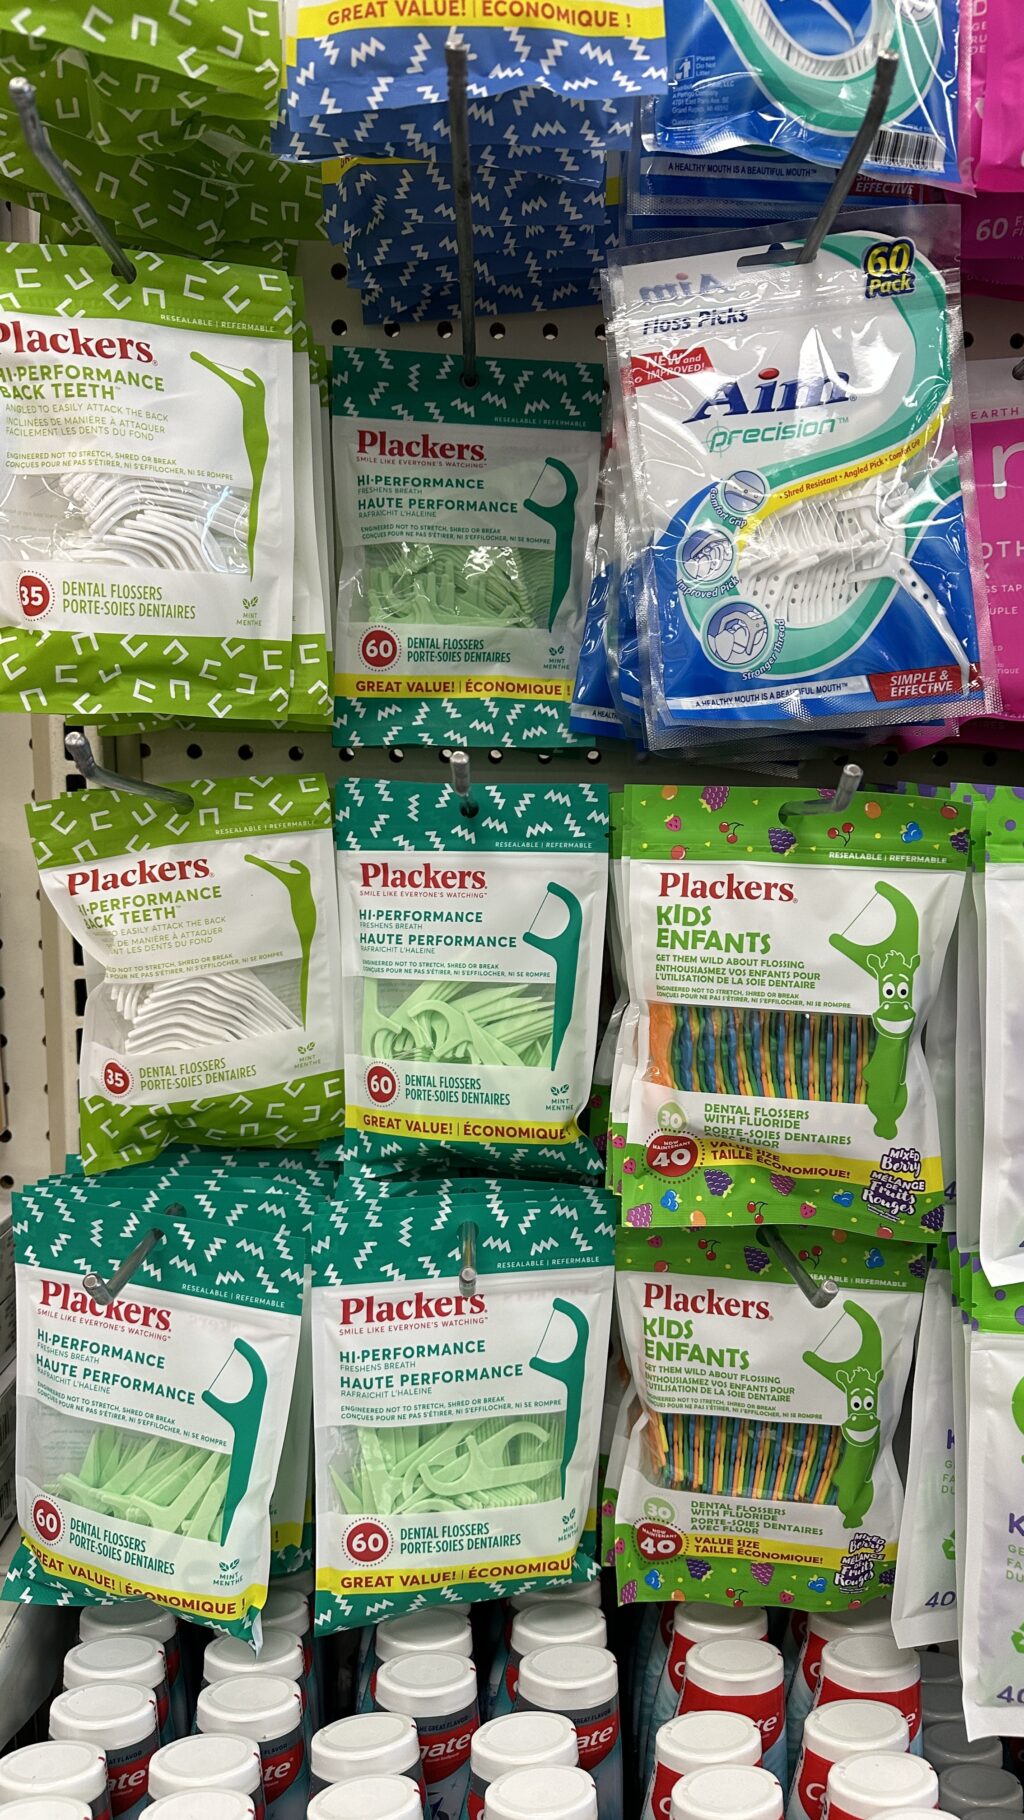 plackers flossers at dollar tree